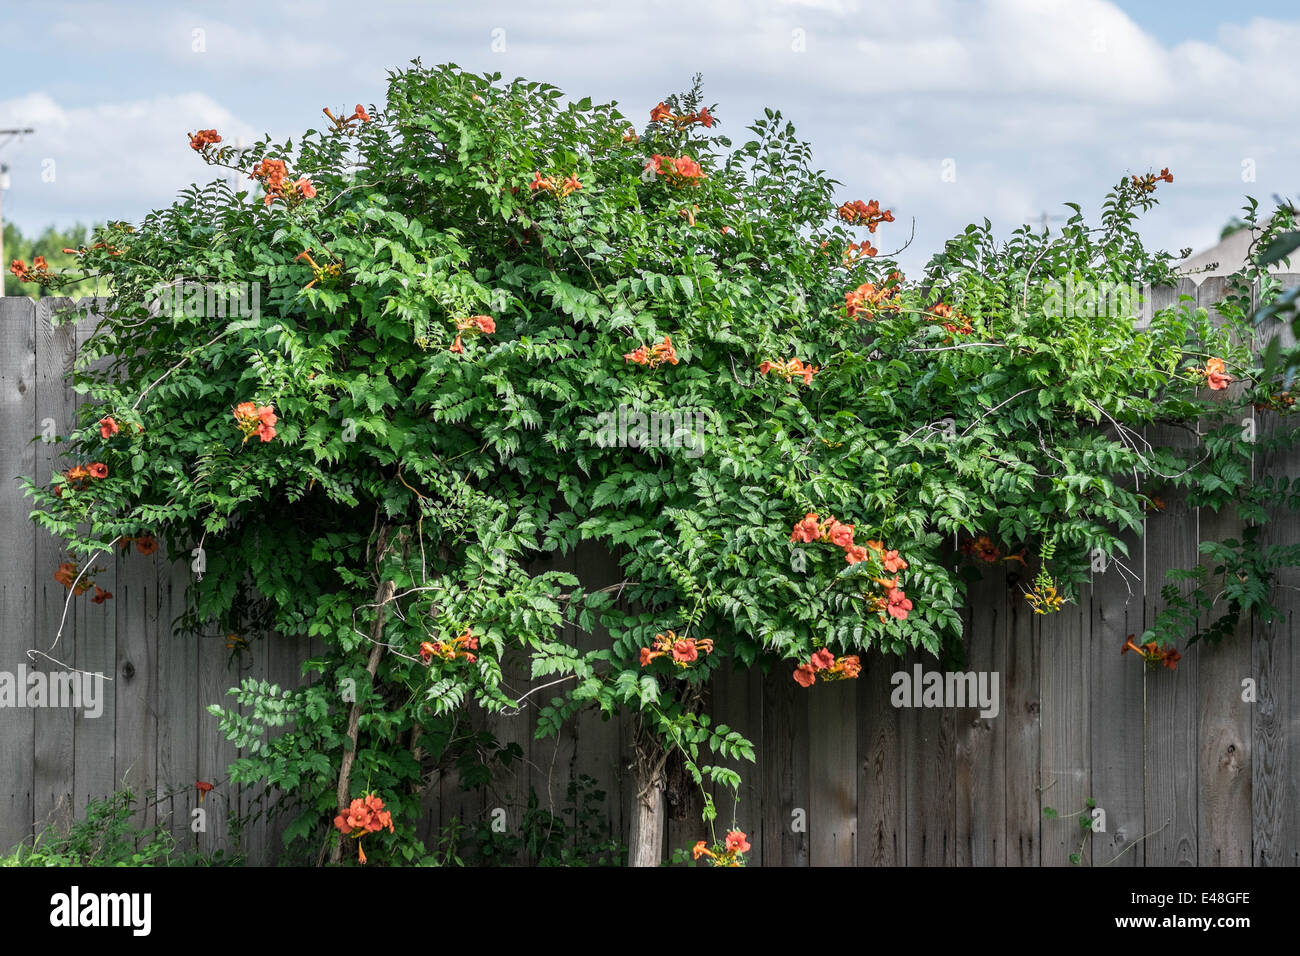 A blooming or flowering trumpet vine, Campsis radicans, against a wooden fence. USA. Stock Photo